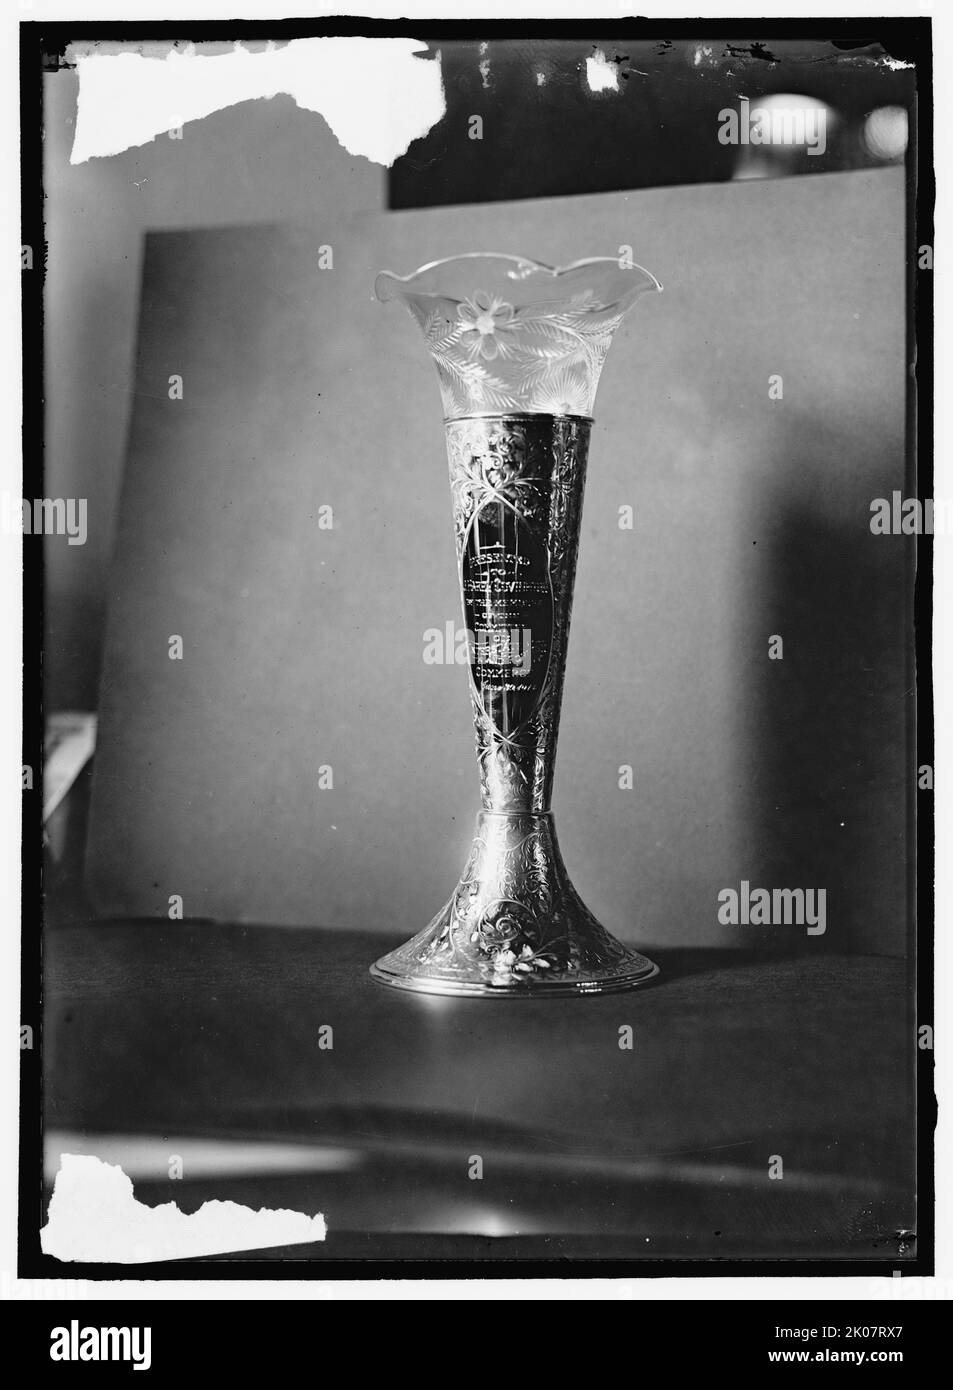 Cup or Vase &quot;Presented to J. Harry Covington by the members of the Committee of Interstate and Foreign Commerce, June 30, 1914&quot;. American politician James Harry Covington served as Chief Justice of the Supreme Court of the District of Columbia, and founded the law firm of Covington &amp; Burling. Stock Photo